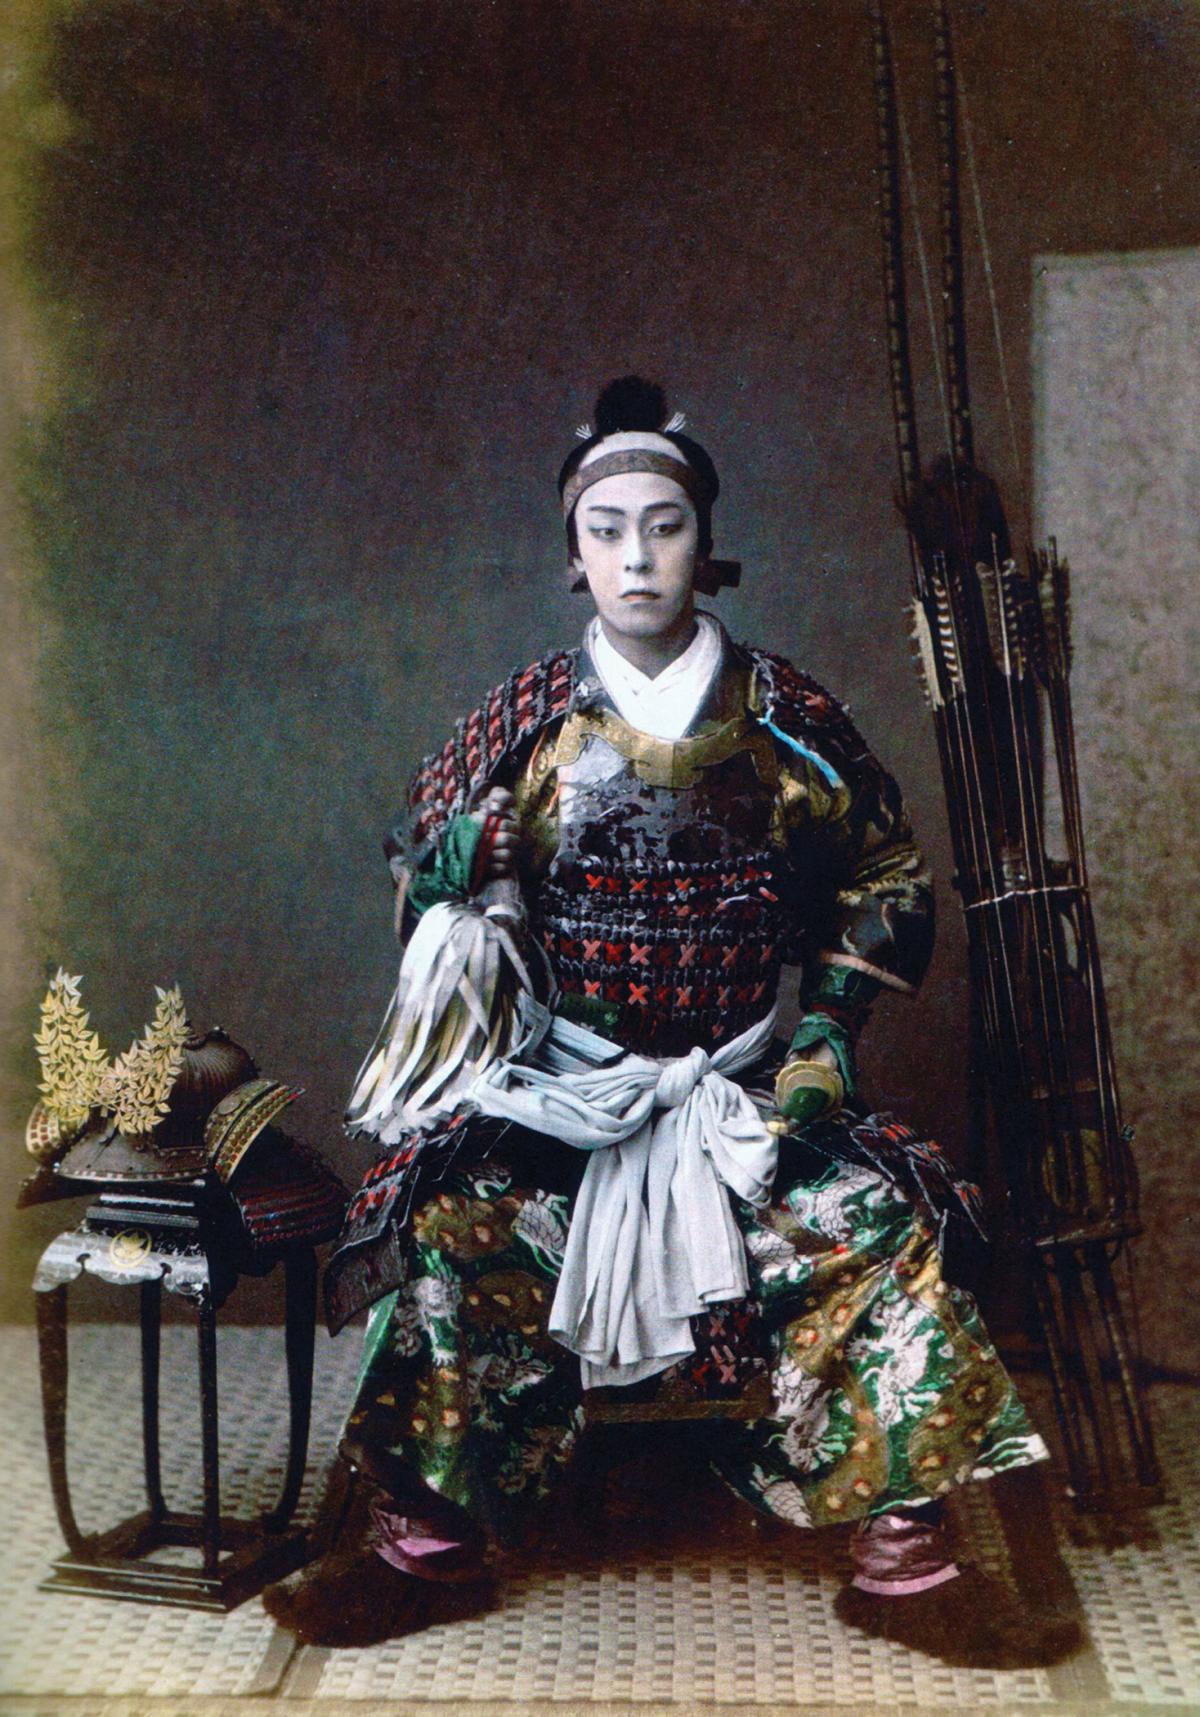 A color-tinted photograph of a samurai sitting in 1867.